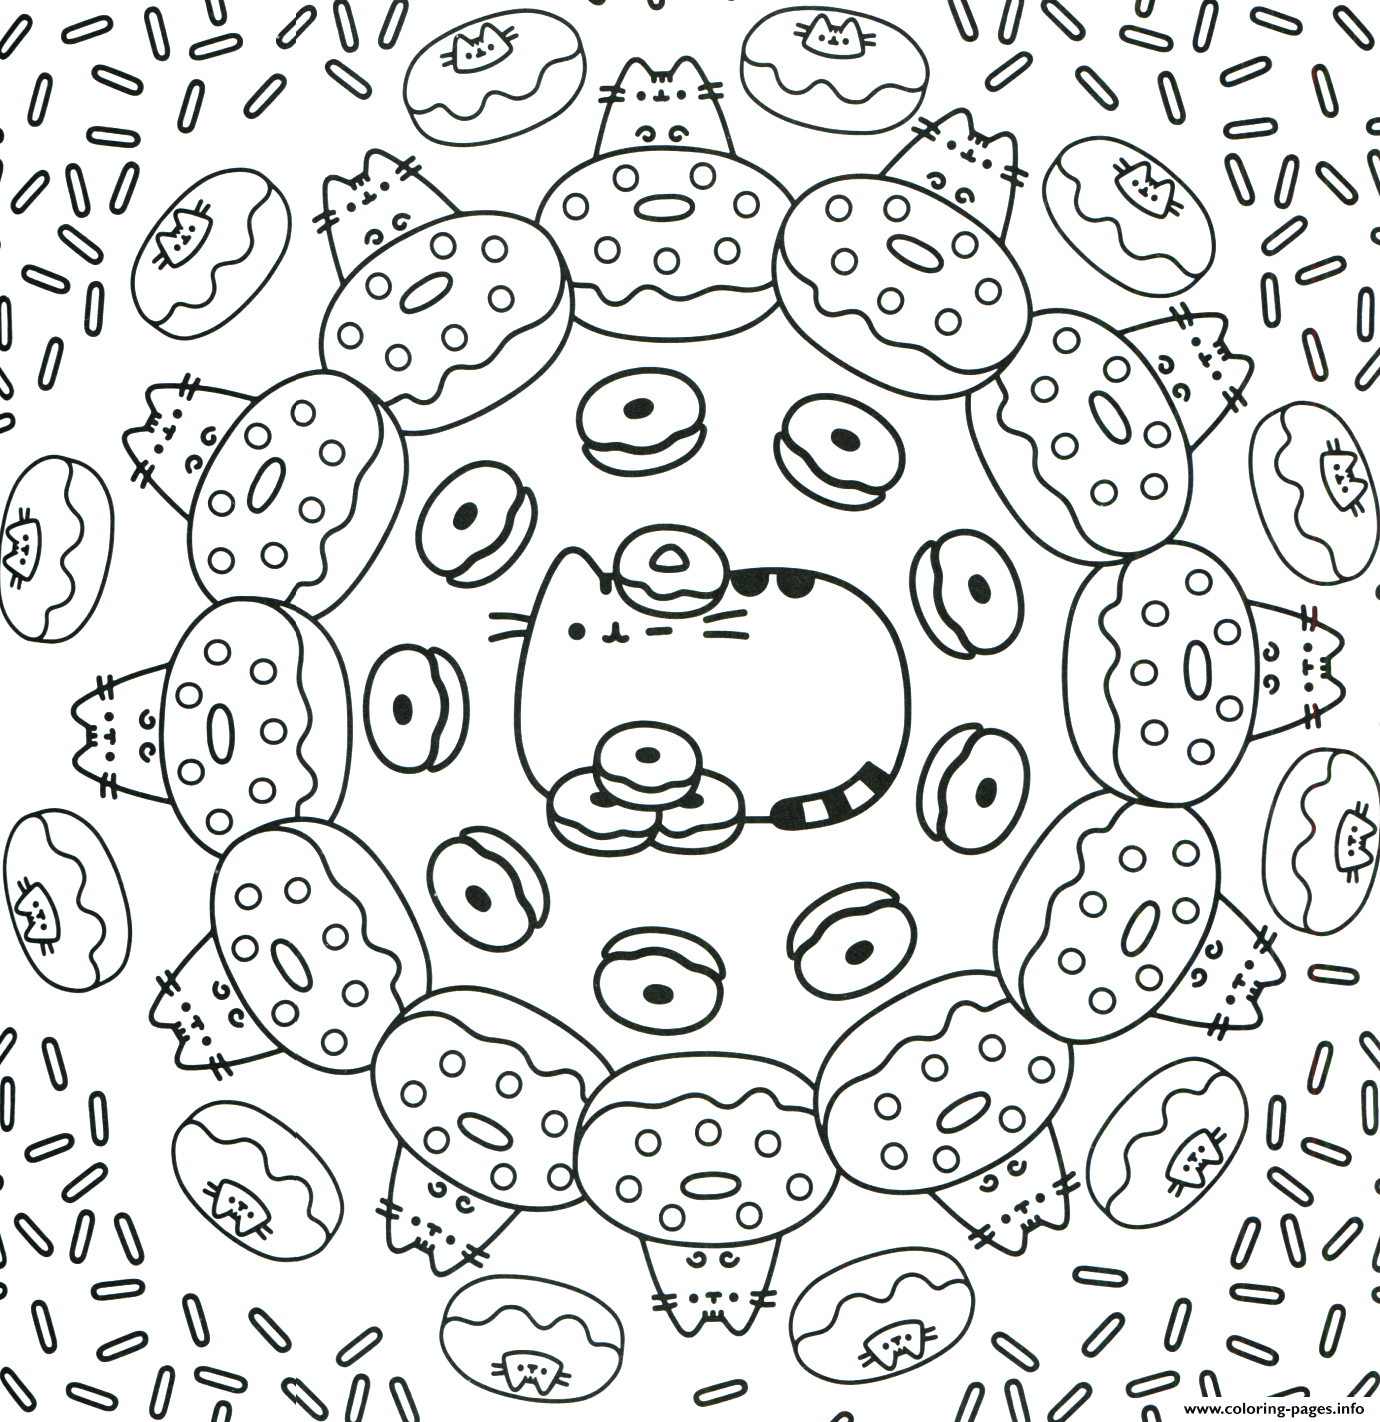 Pusheen The Cat Donuts Pattern coloring